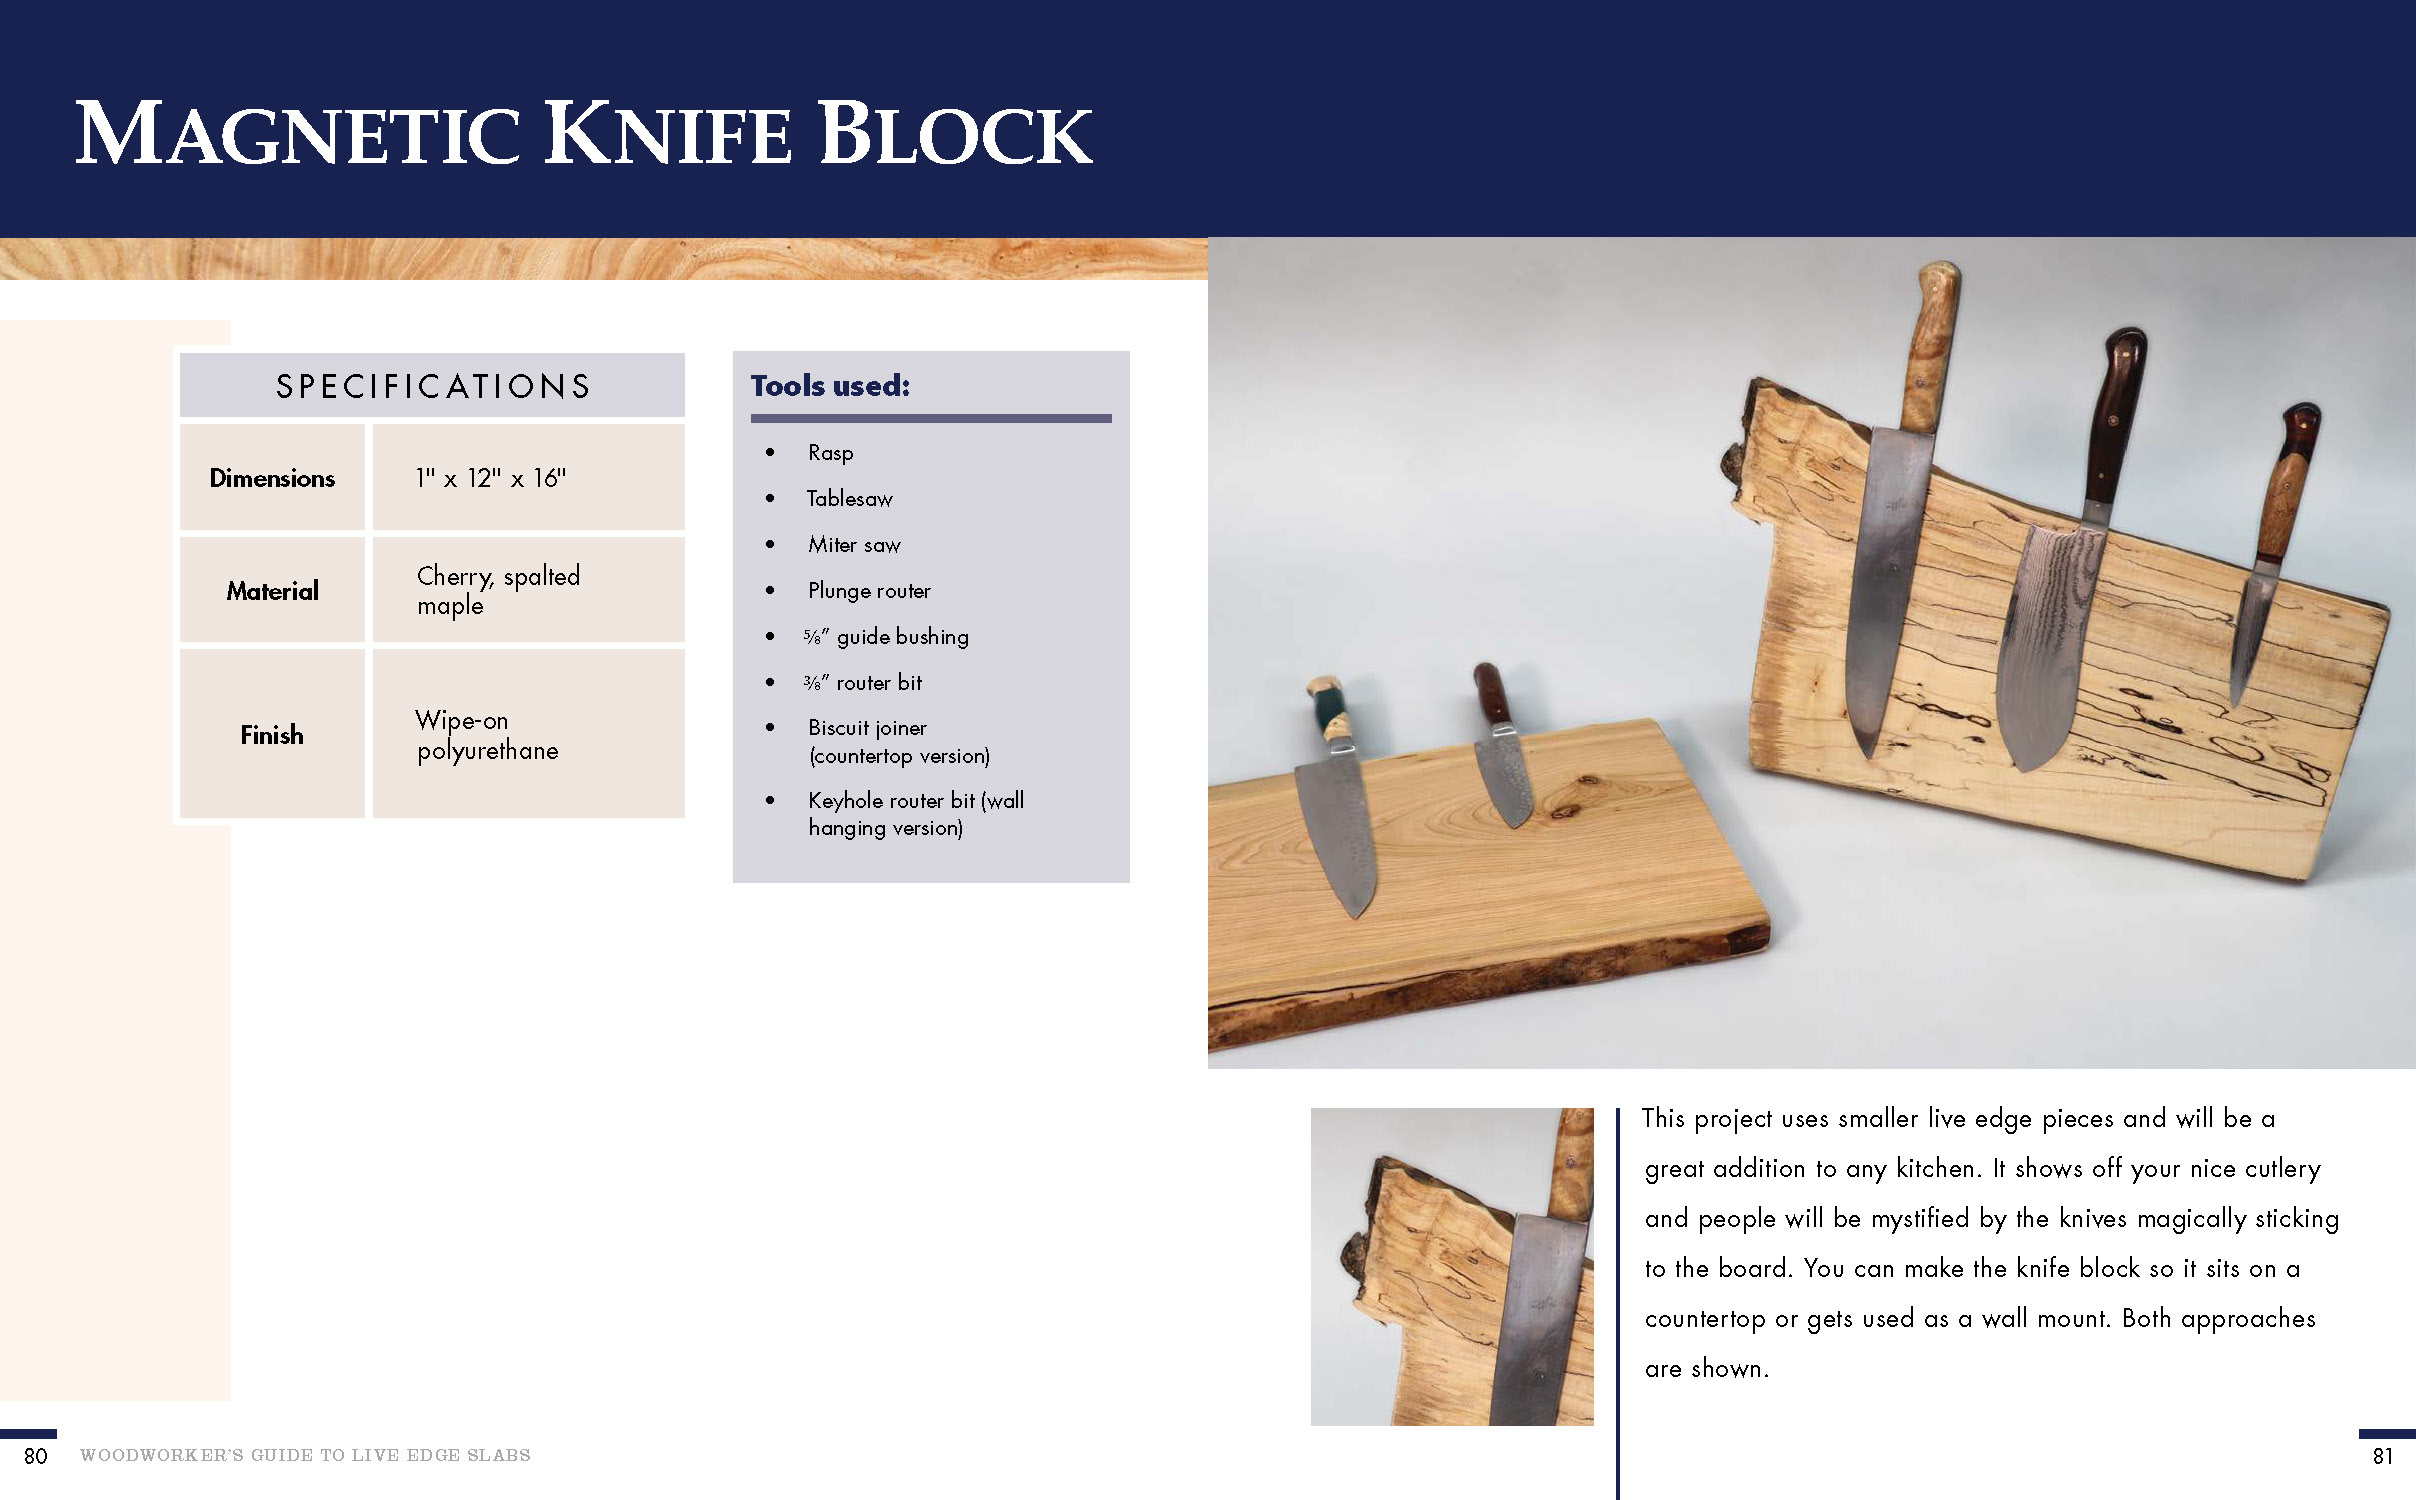 Magnetic Knife Block specifications and tools used